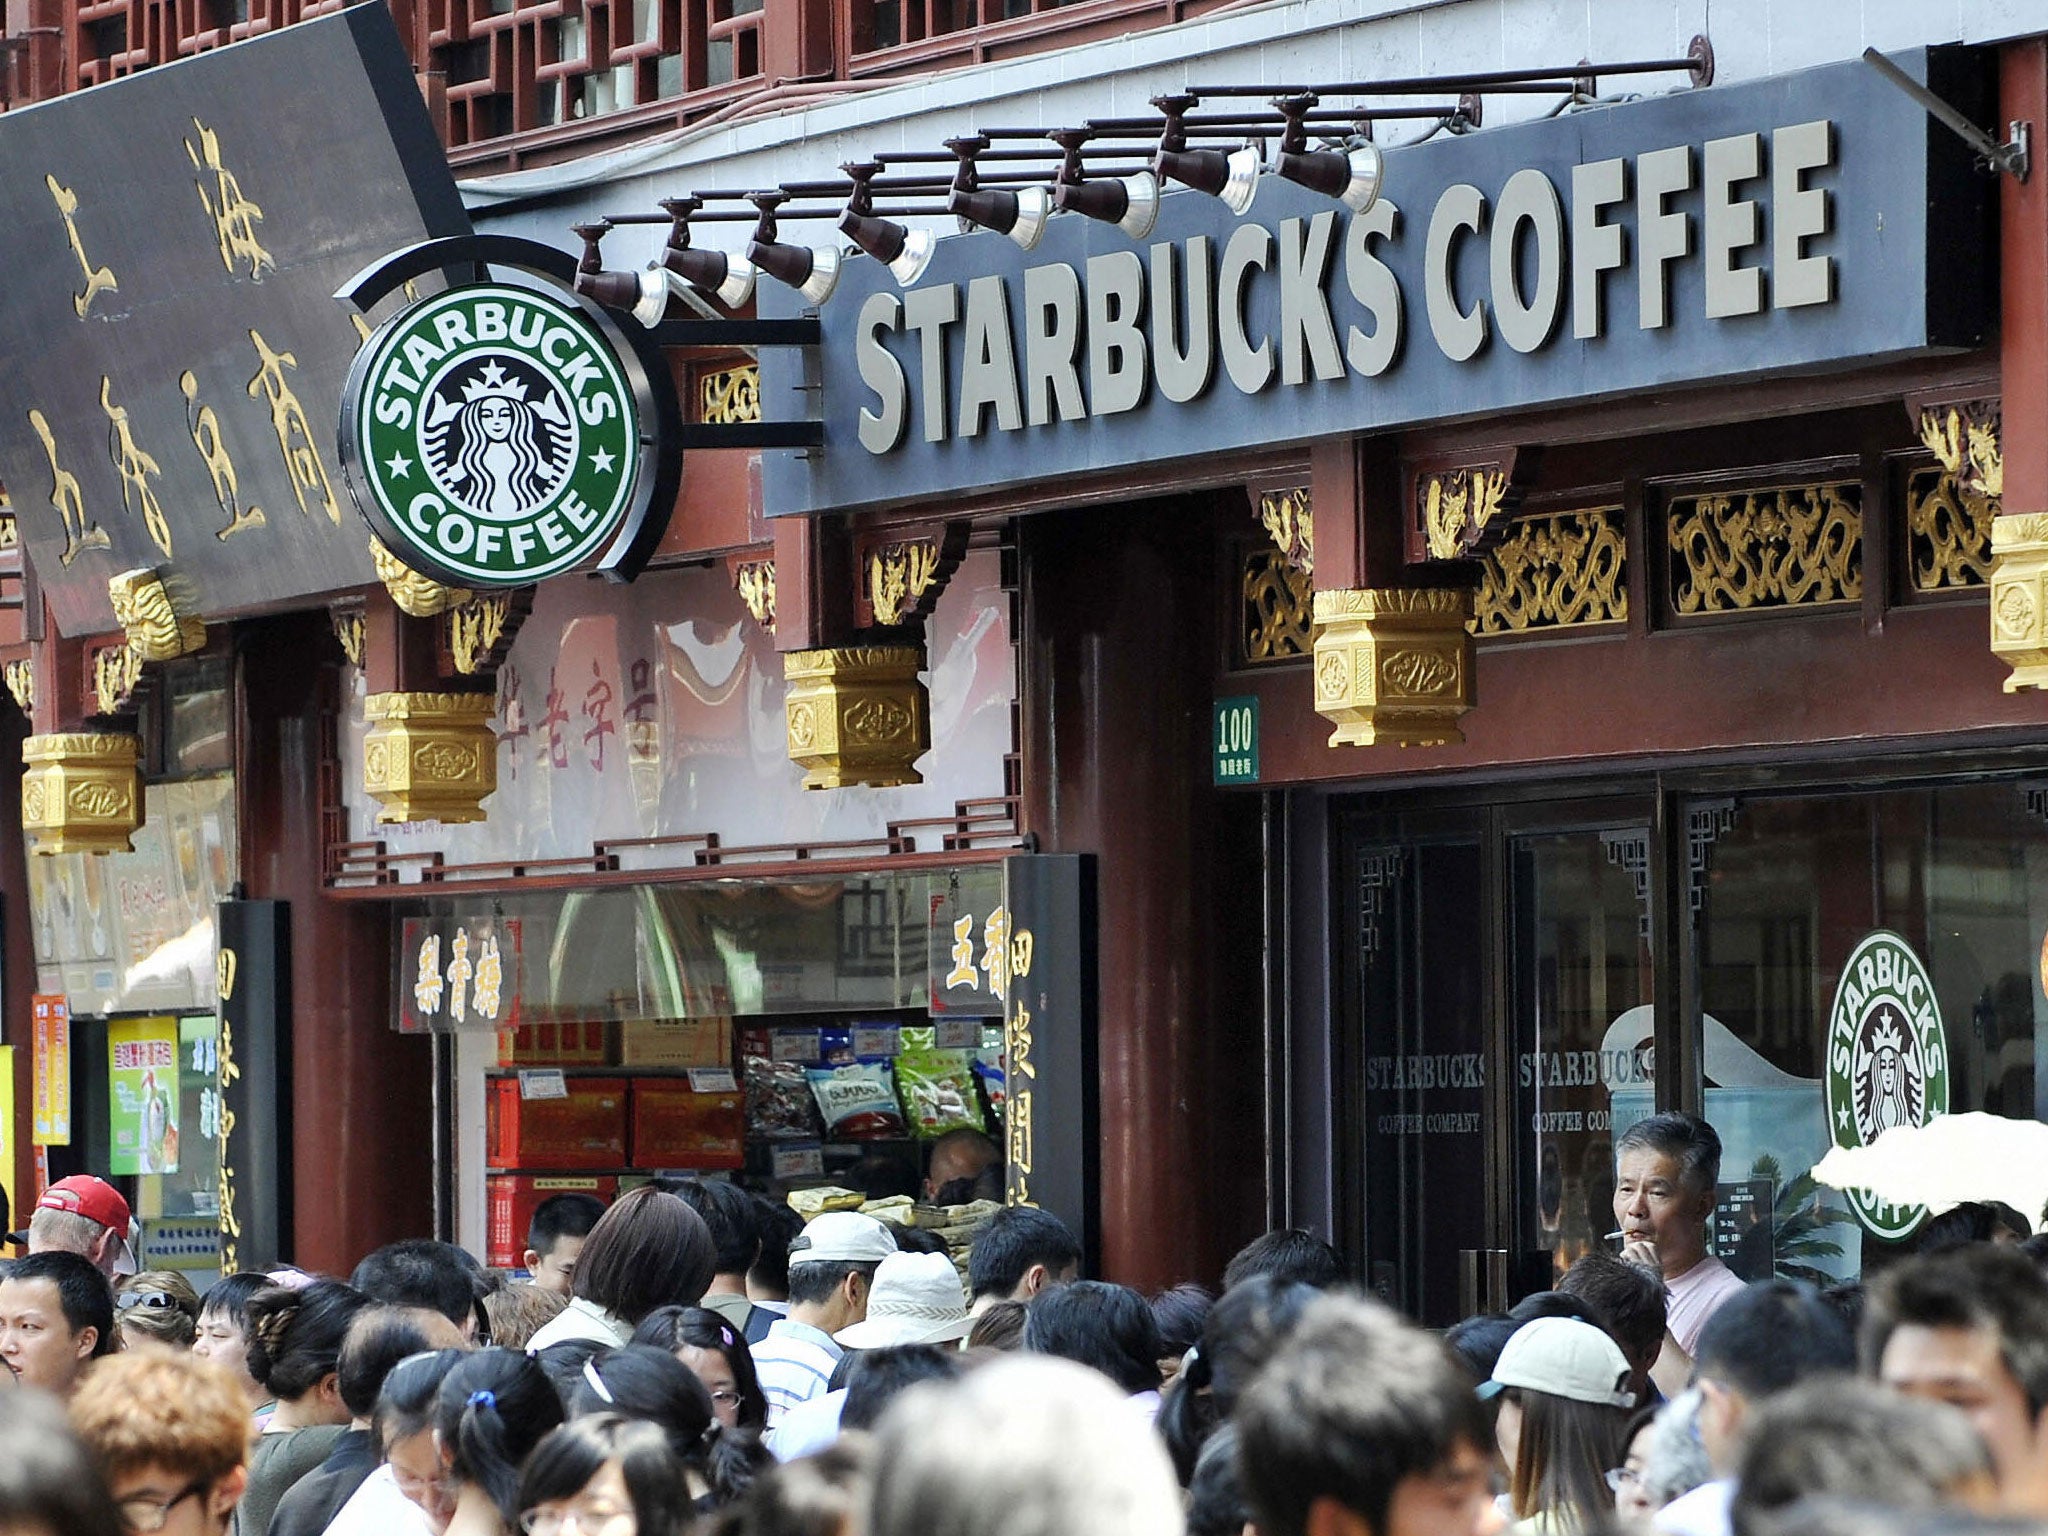 Pedestrians make their way past a Starbucks coffee shop in a street in the Chinese city Shanghai's old town